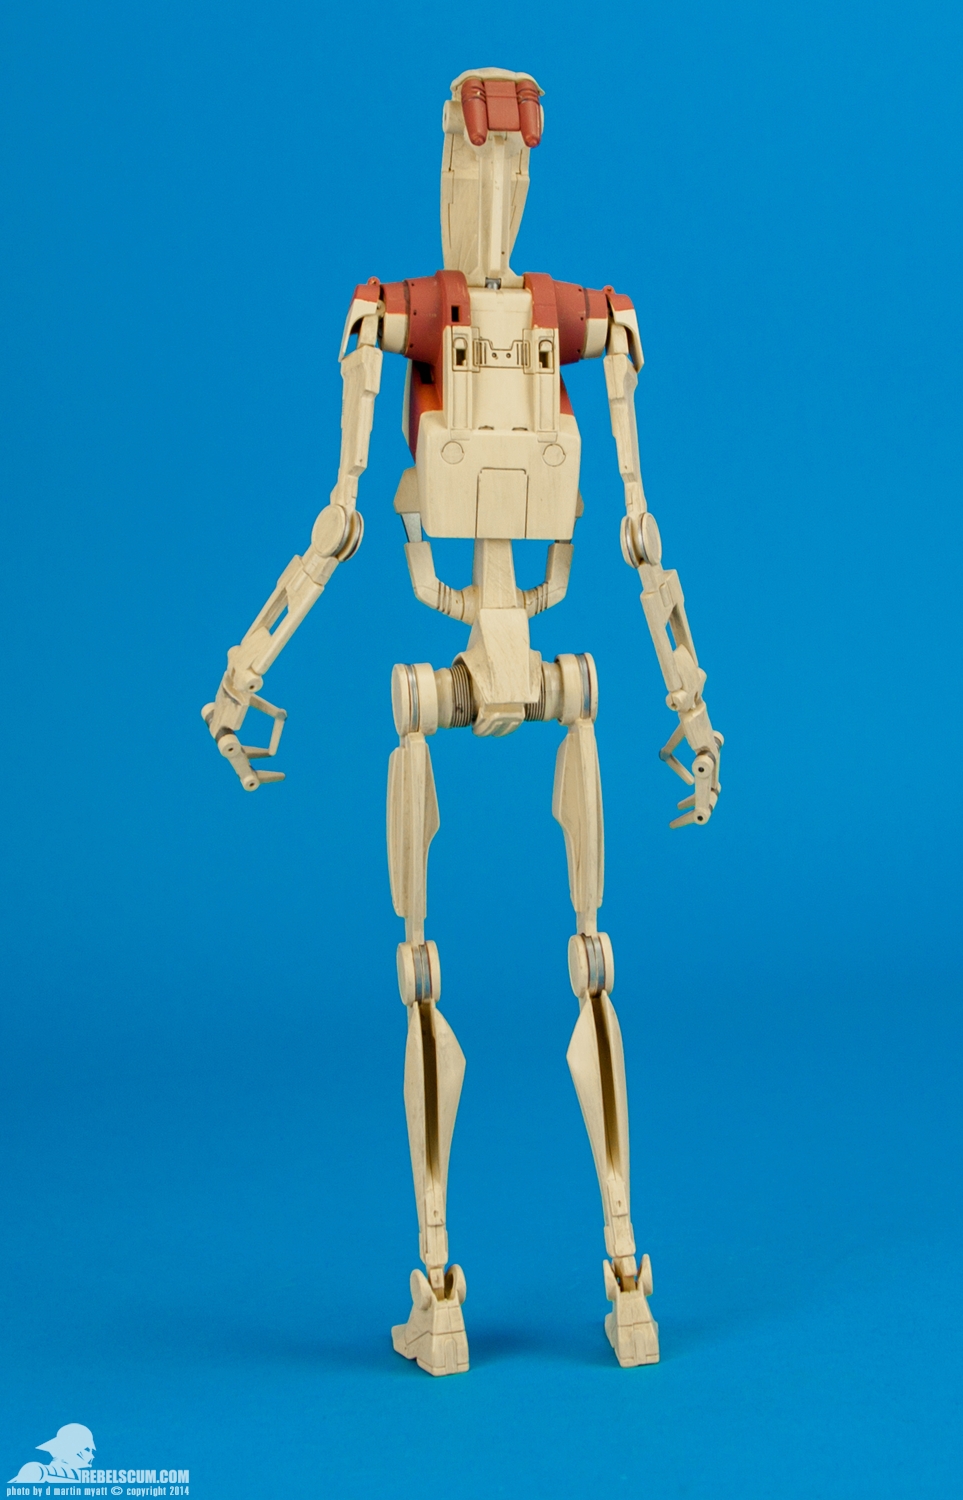 Security-Droids-Sixth-Scale-Sideshow-Collectibles-008.jpg